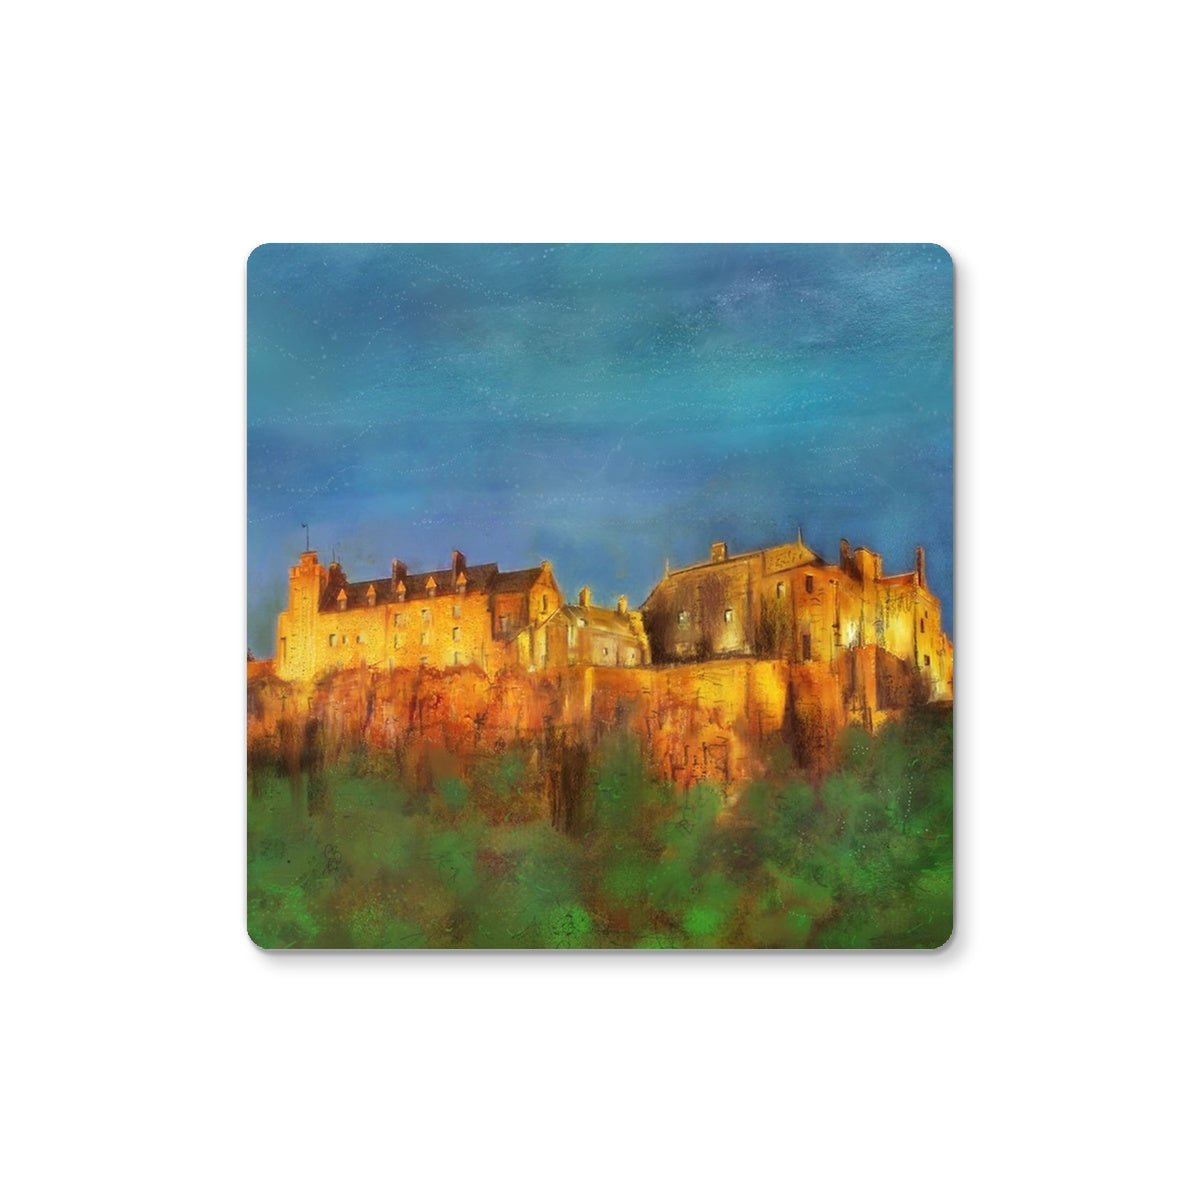 Stirling Castle Art Gifts Coaster-Coasters-Scottish Castles Art Gallery-2 Coasters-Paintings, Prints, Homeware, Art Gifts From Scotland By Scottish Artist Kevin Hunter